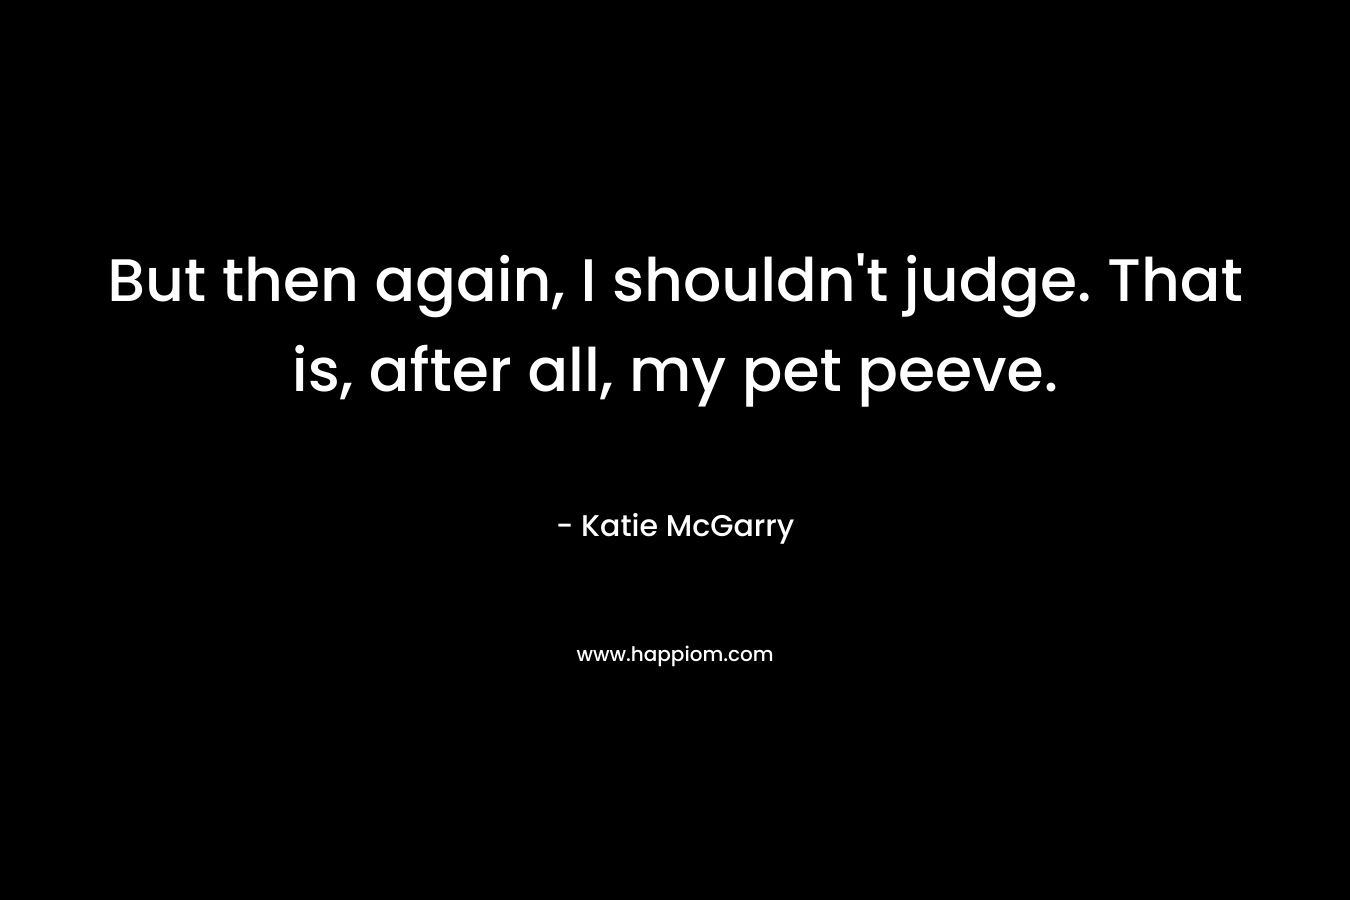 But then again, I shouldn’t judge. That is, after all, my pet peeve. – Katie McGarry